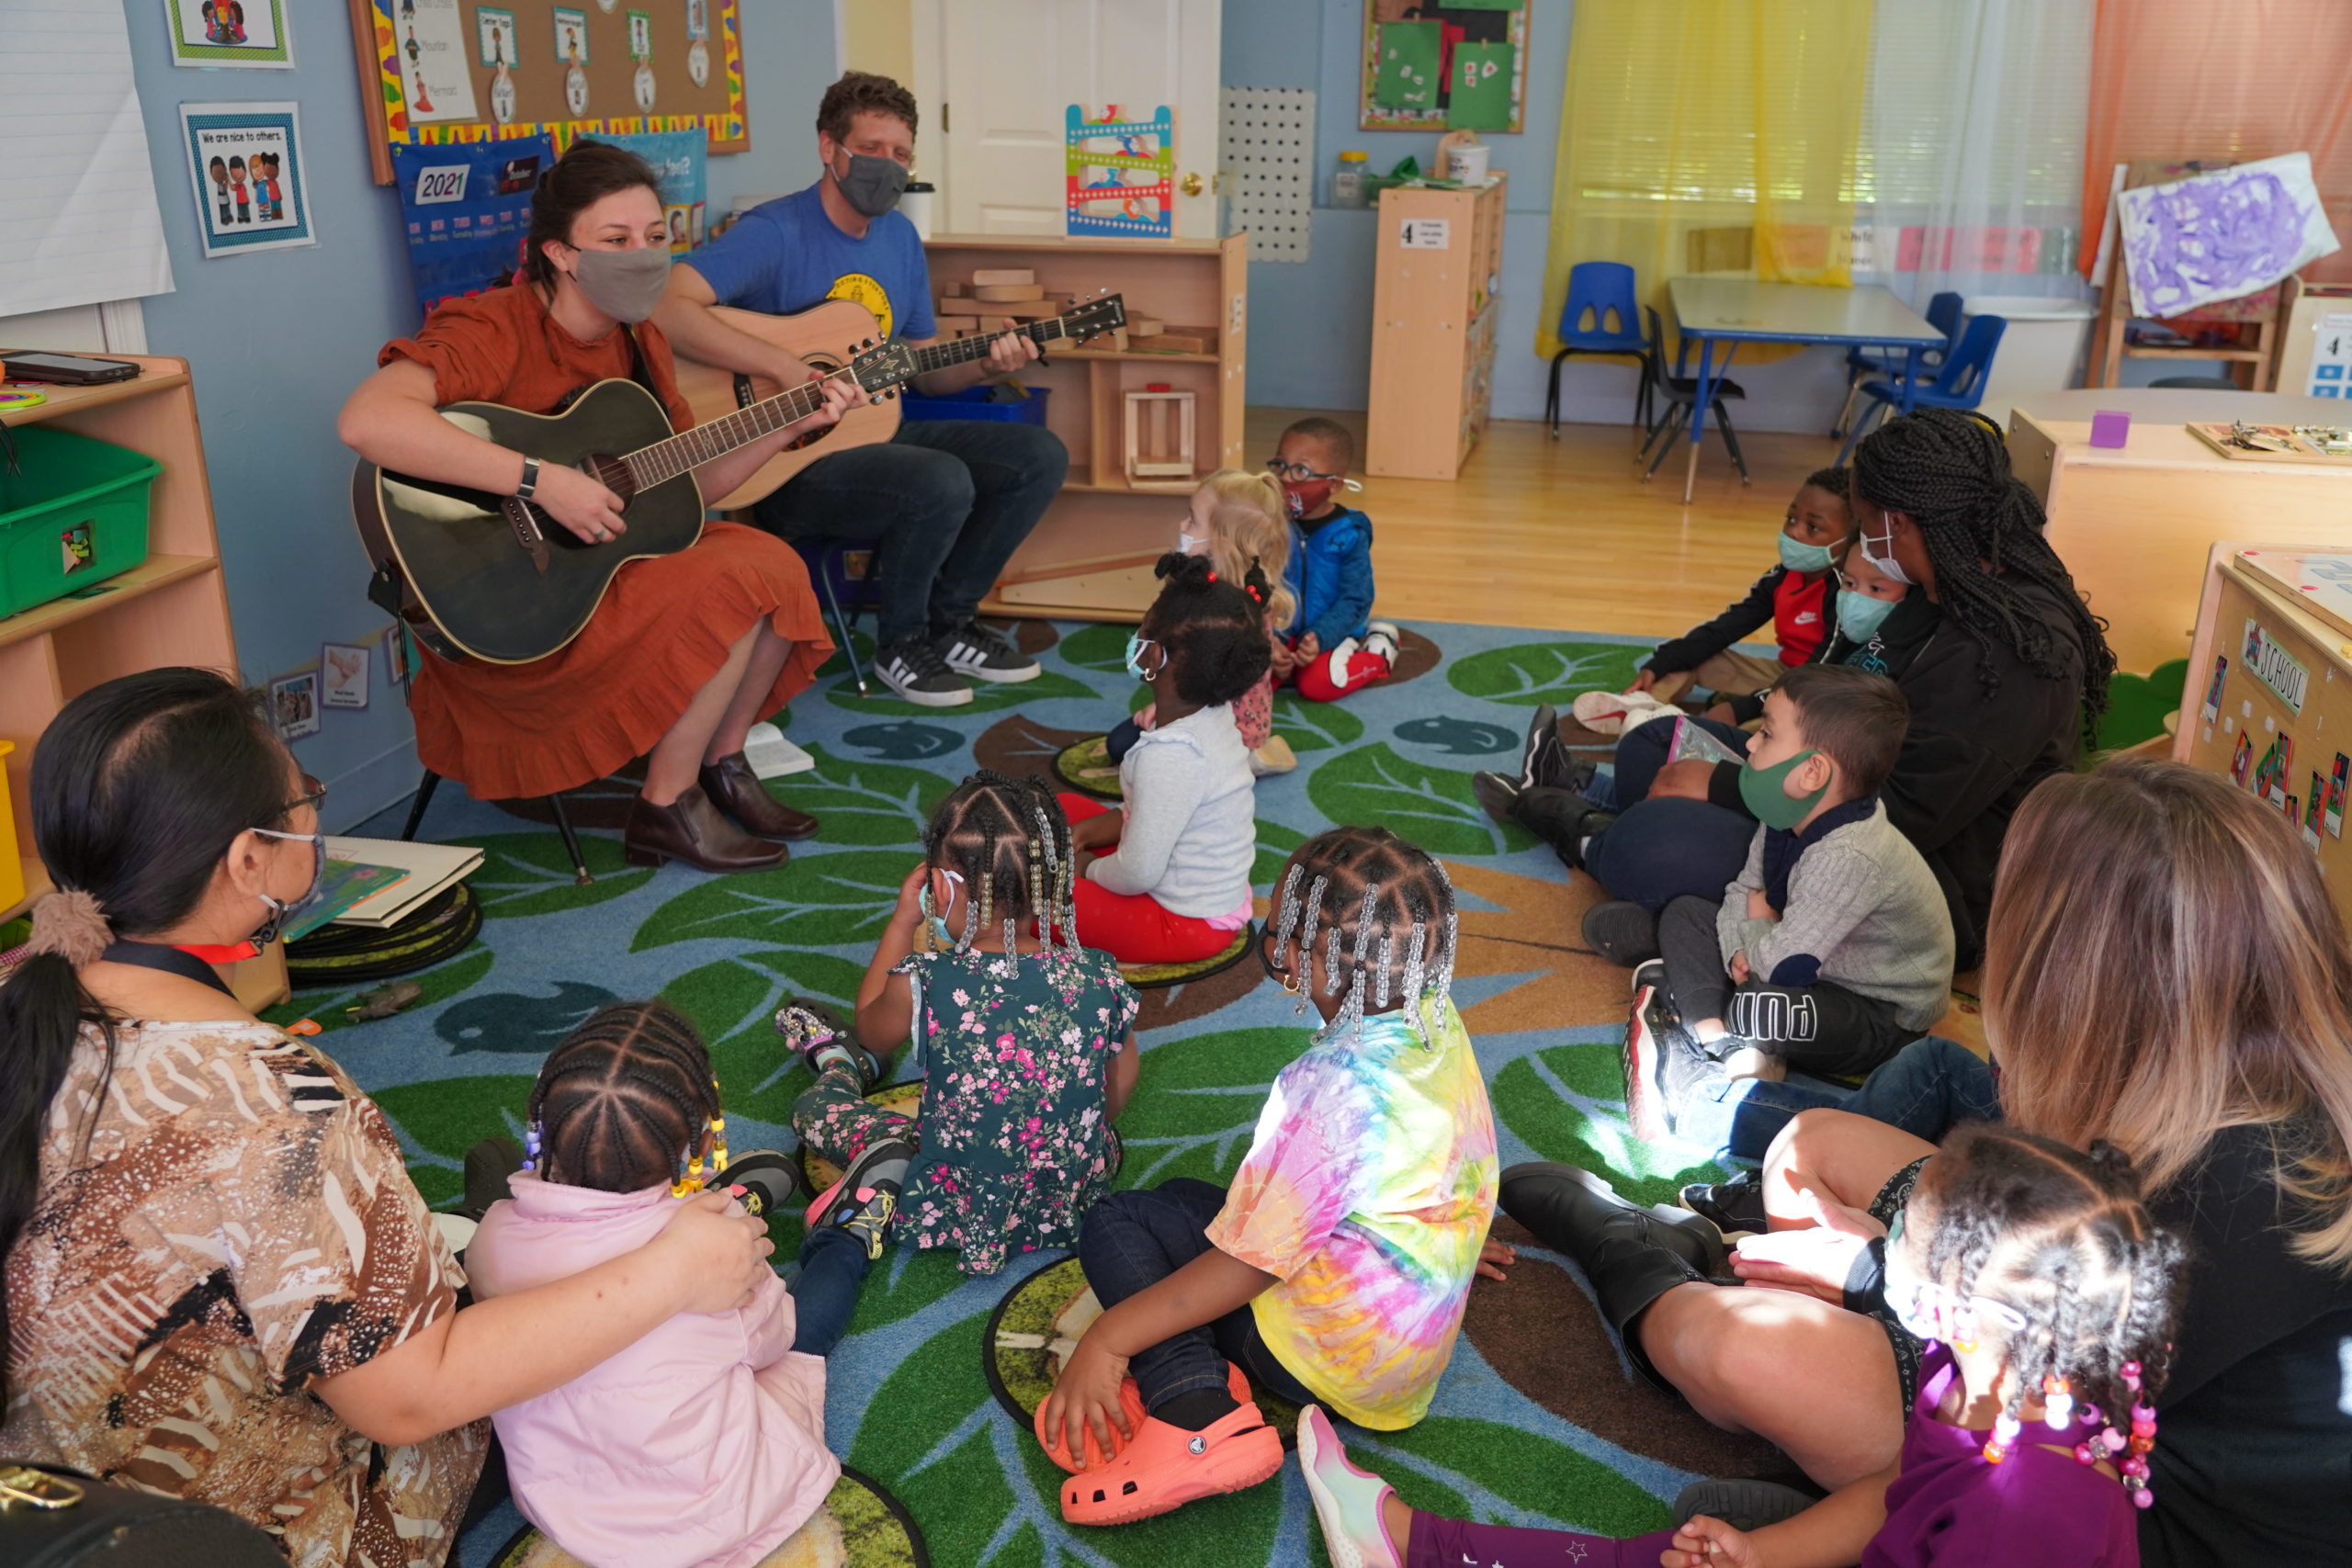 Two music teachers playing guitar in front of a group of young children sitting on a carpet. 